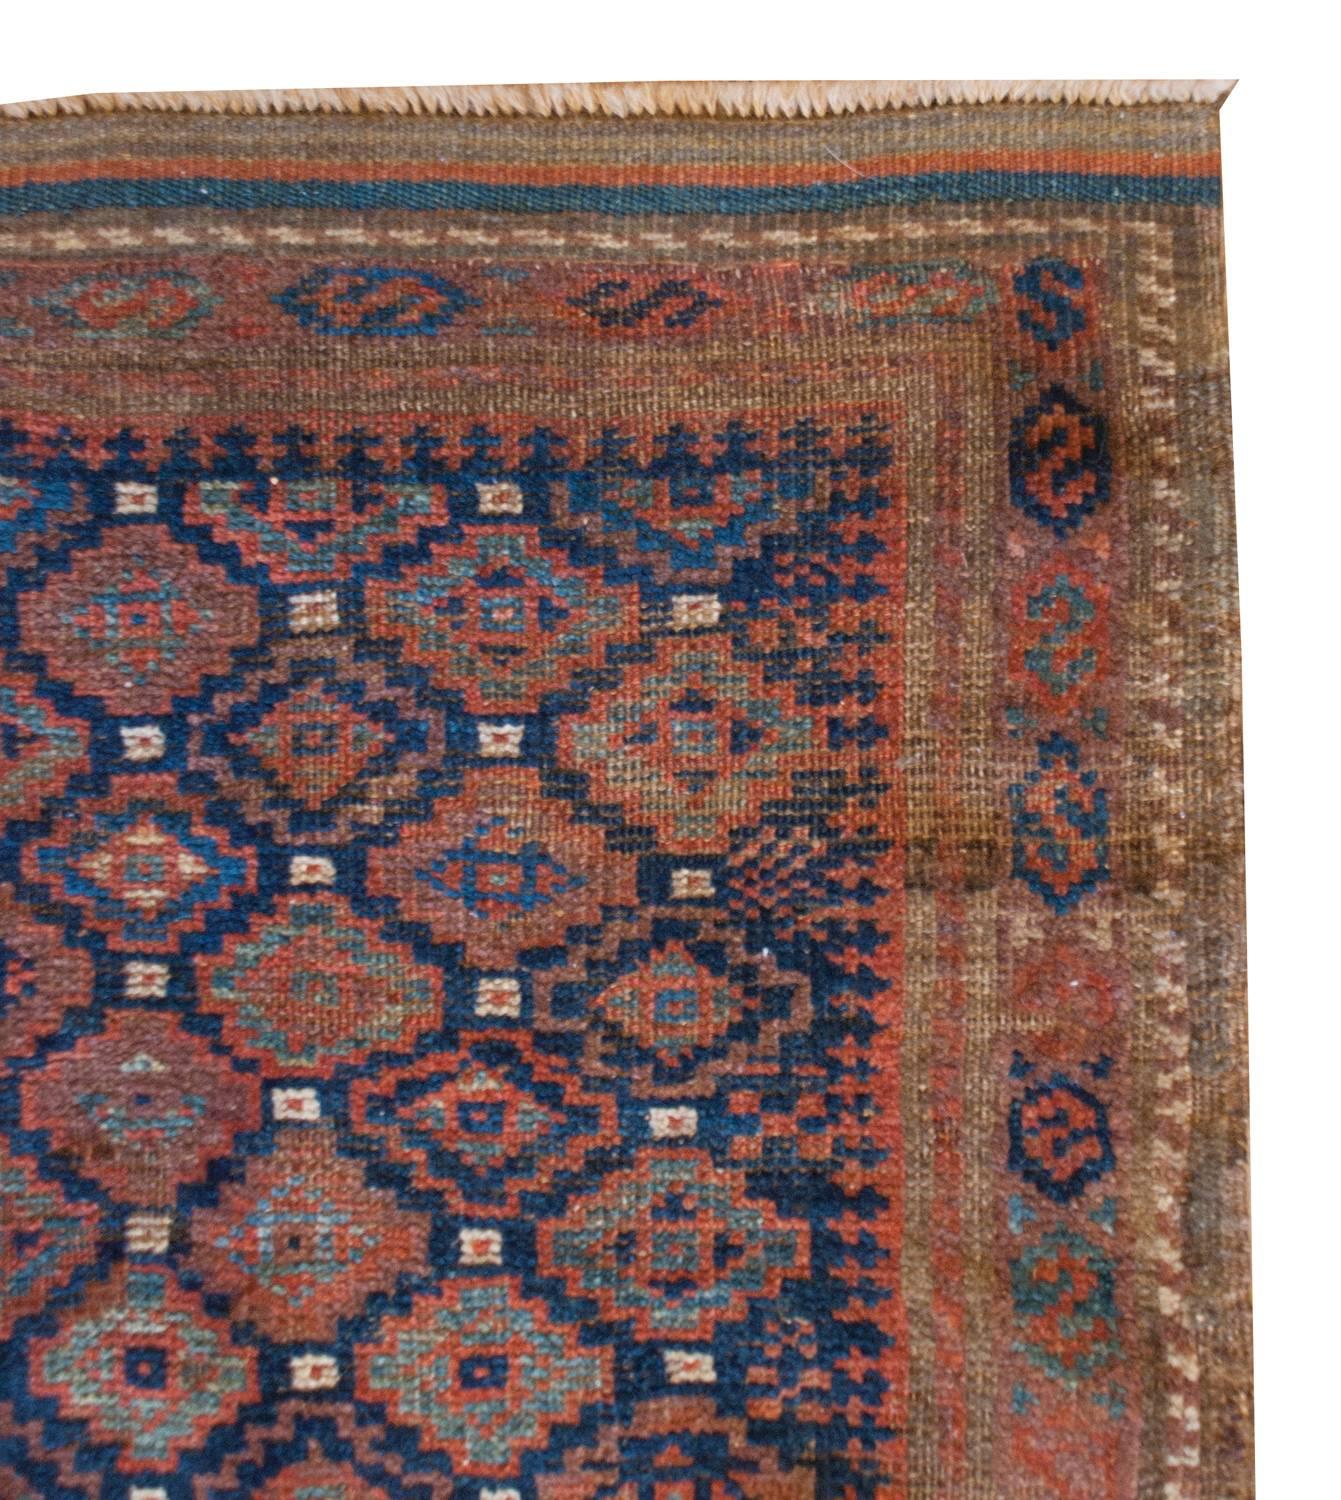 A special, petite, late-19th century Persian Baluch rug with an all-over small-scale diamond pattern woven with light and dark indigo, and crimson dyed wool. The border is wonderful, with a natural camel hair wool with a small 